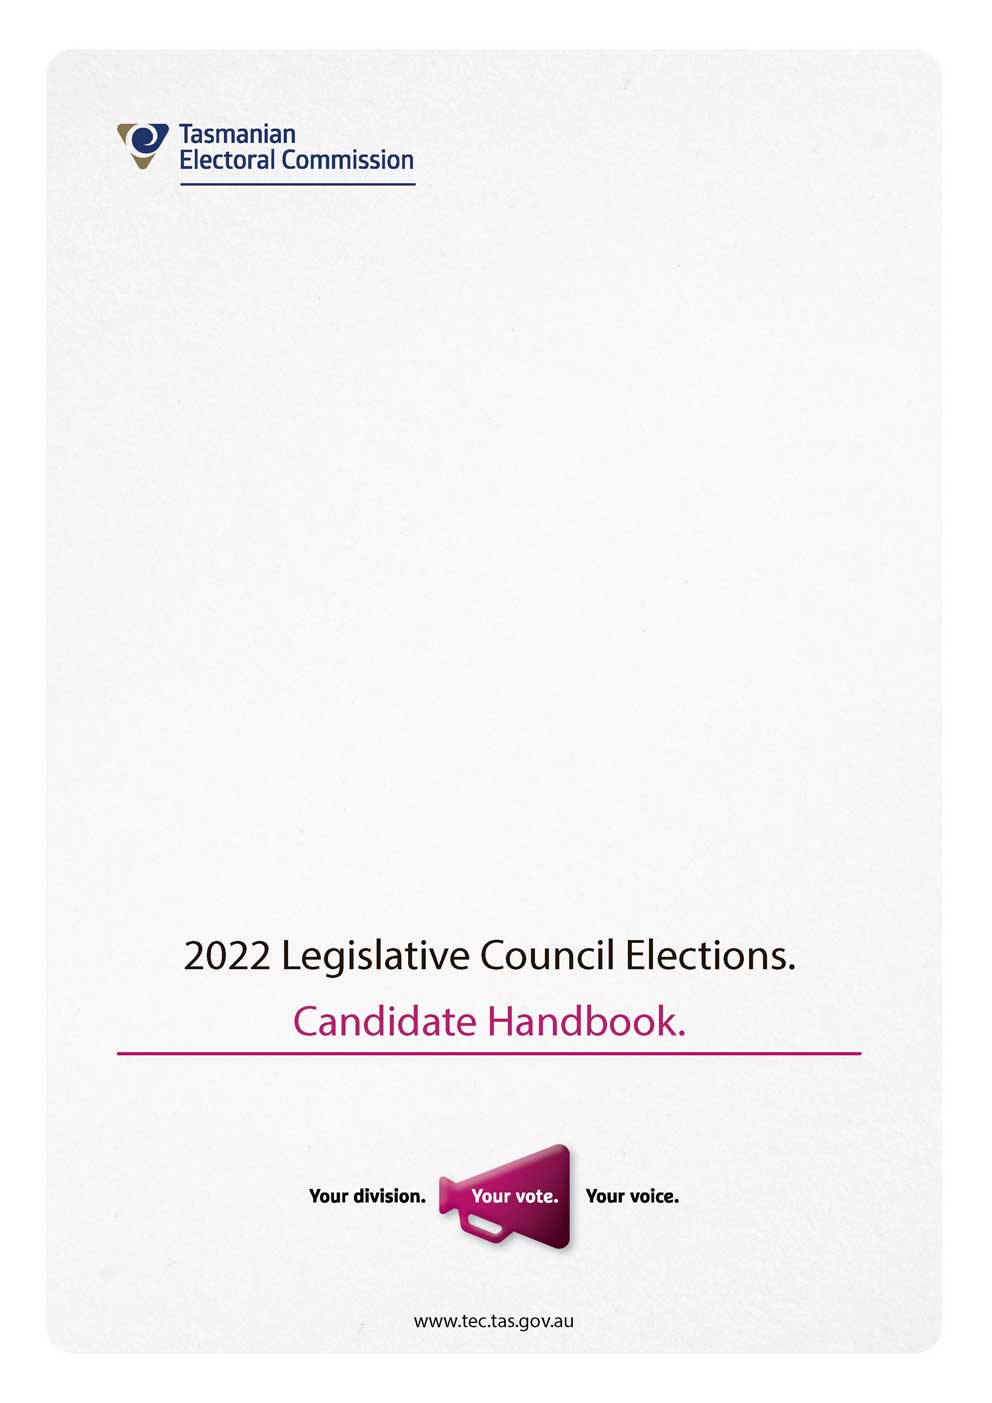 Preview of candidate handbook cover